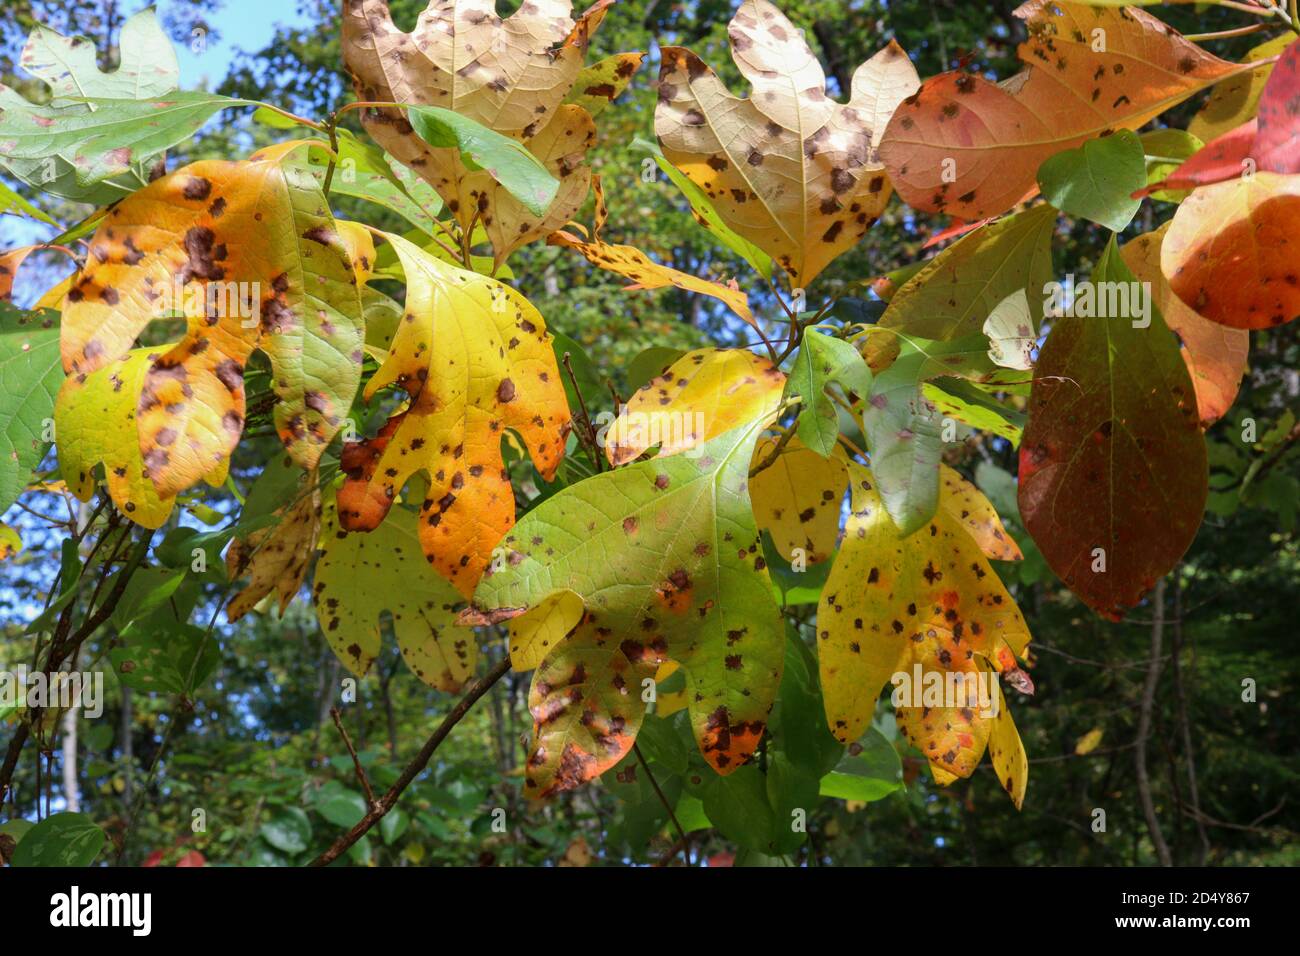 The one, two, and three lobed leaves of the Sassafras tree (Sassafras albidum) can turn varying shades of yellow, orange, and red. Stock Photo